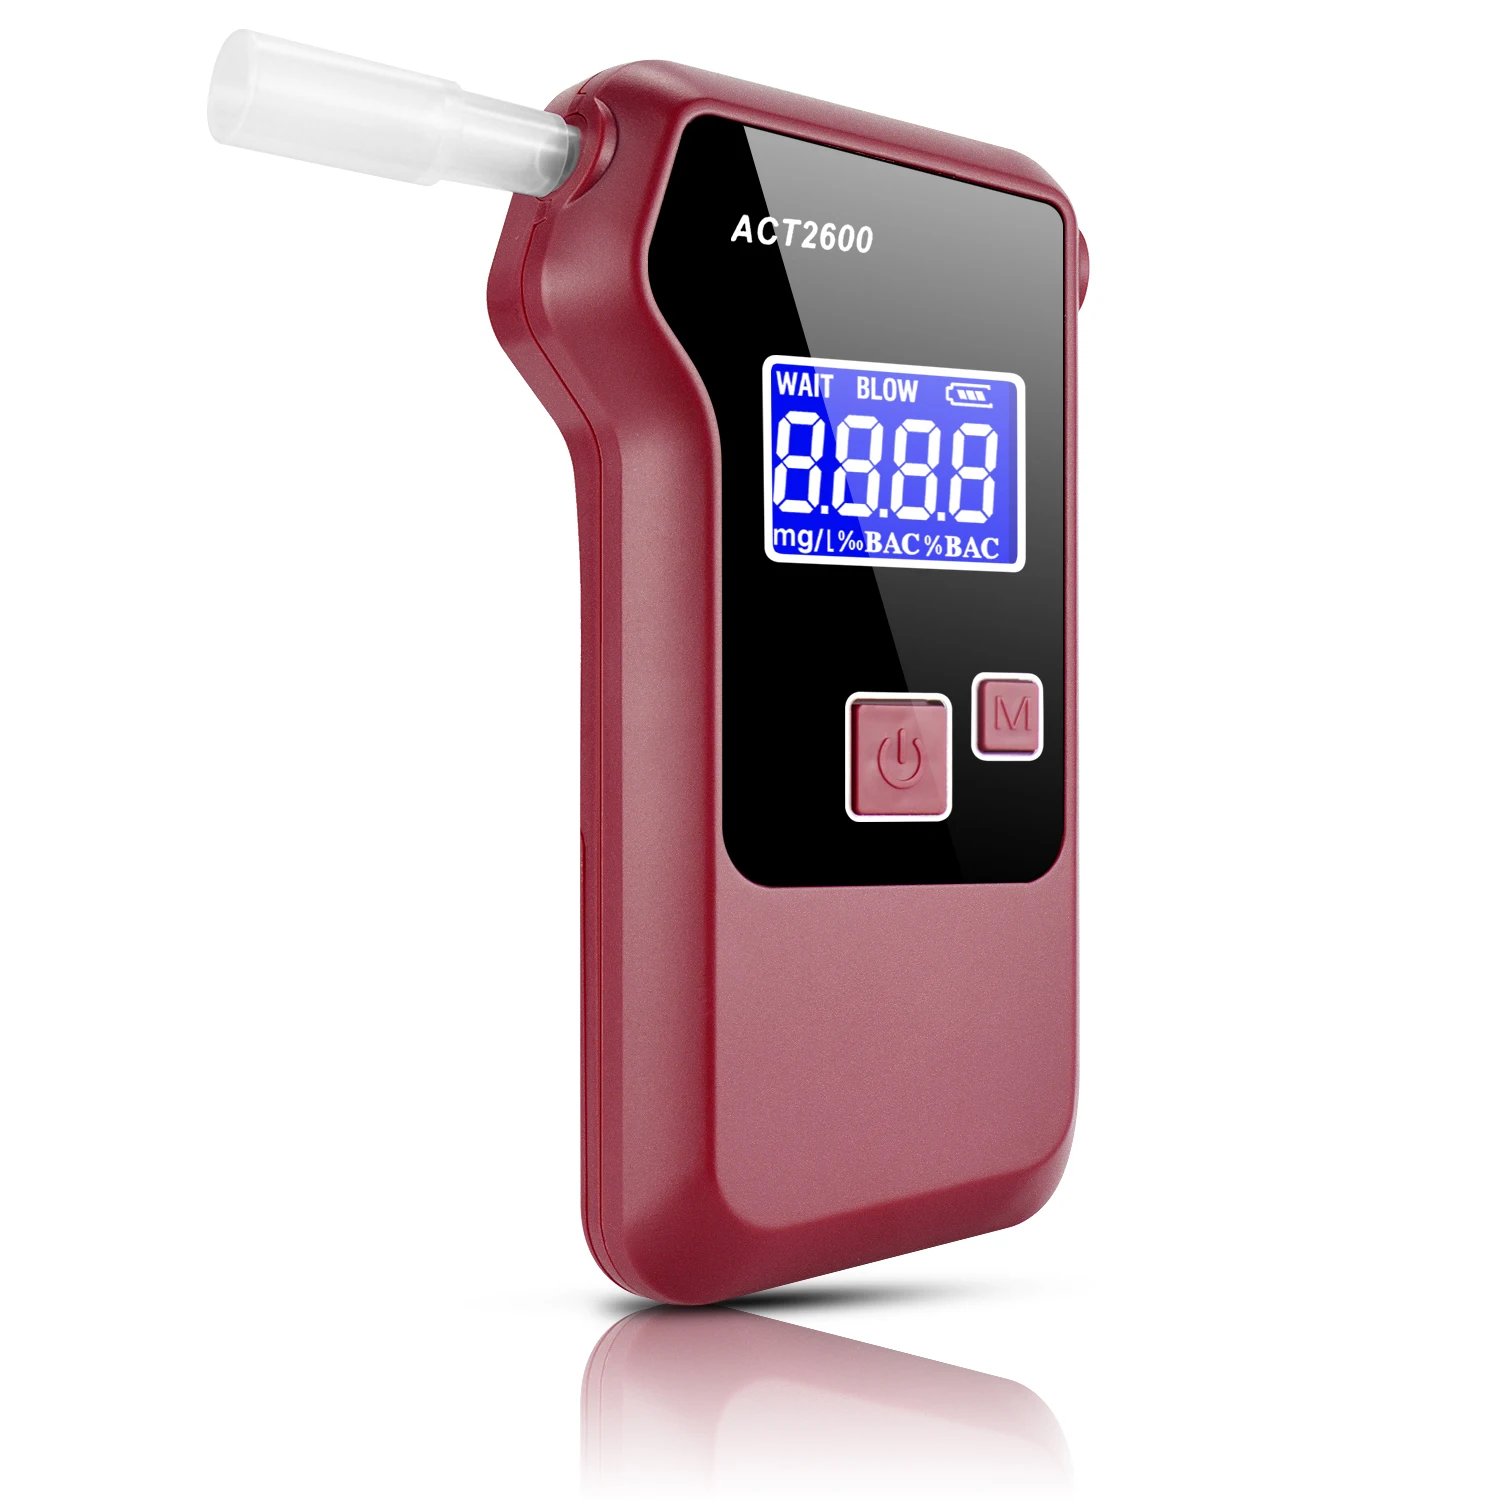 Lcd Blaastest Professionele Alcohol Tester Machine Fit Alcohol Tester - Buy Breathalyzerr,Alcohol Machine,Fit Alcohol Tester Product on Alibaba.com